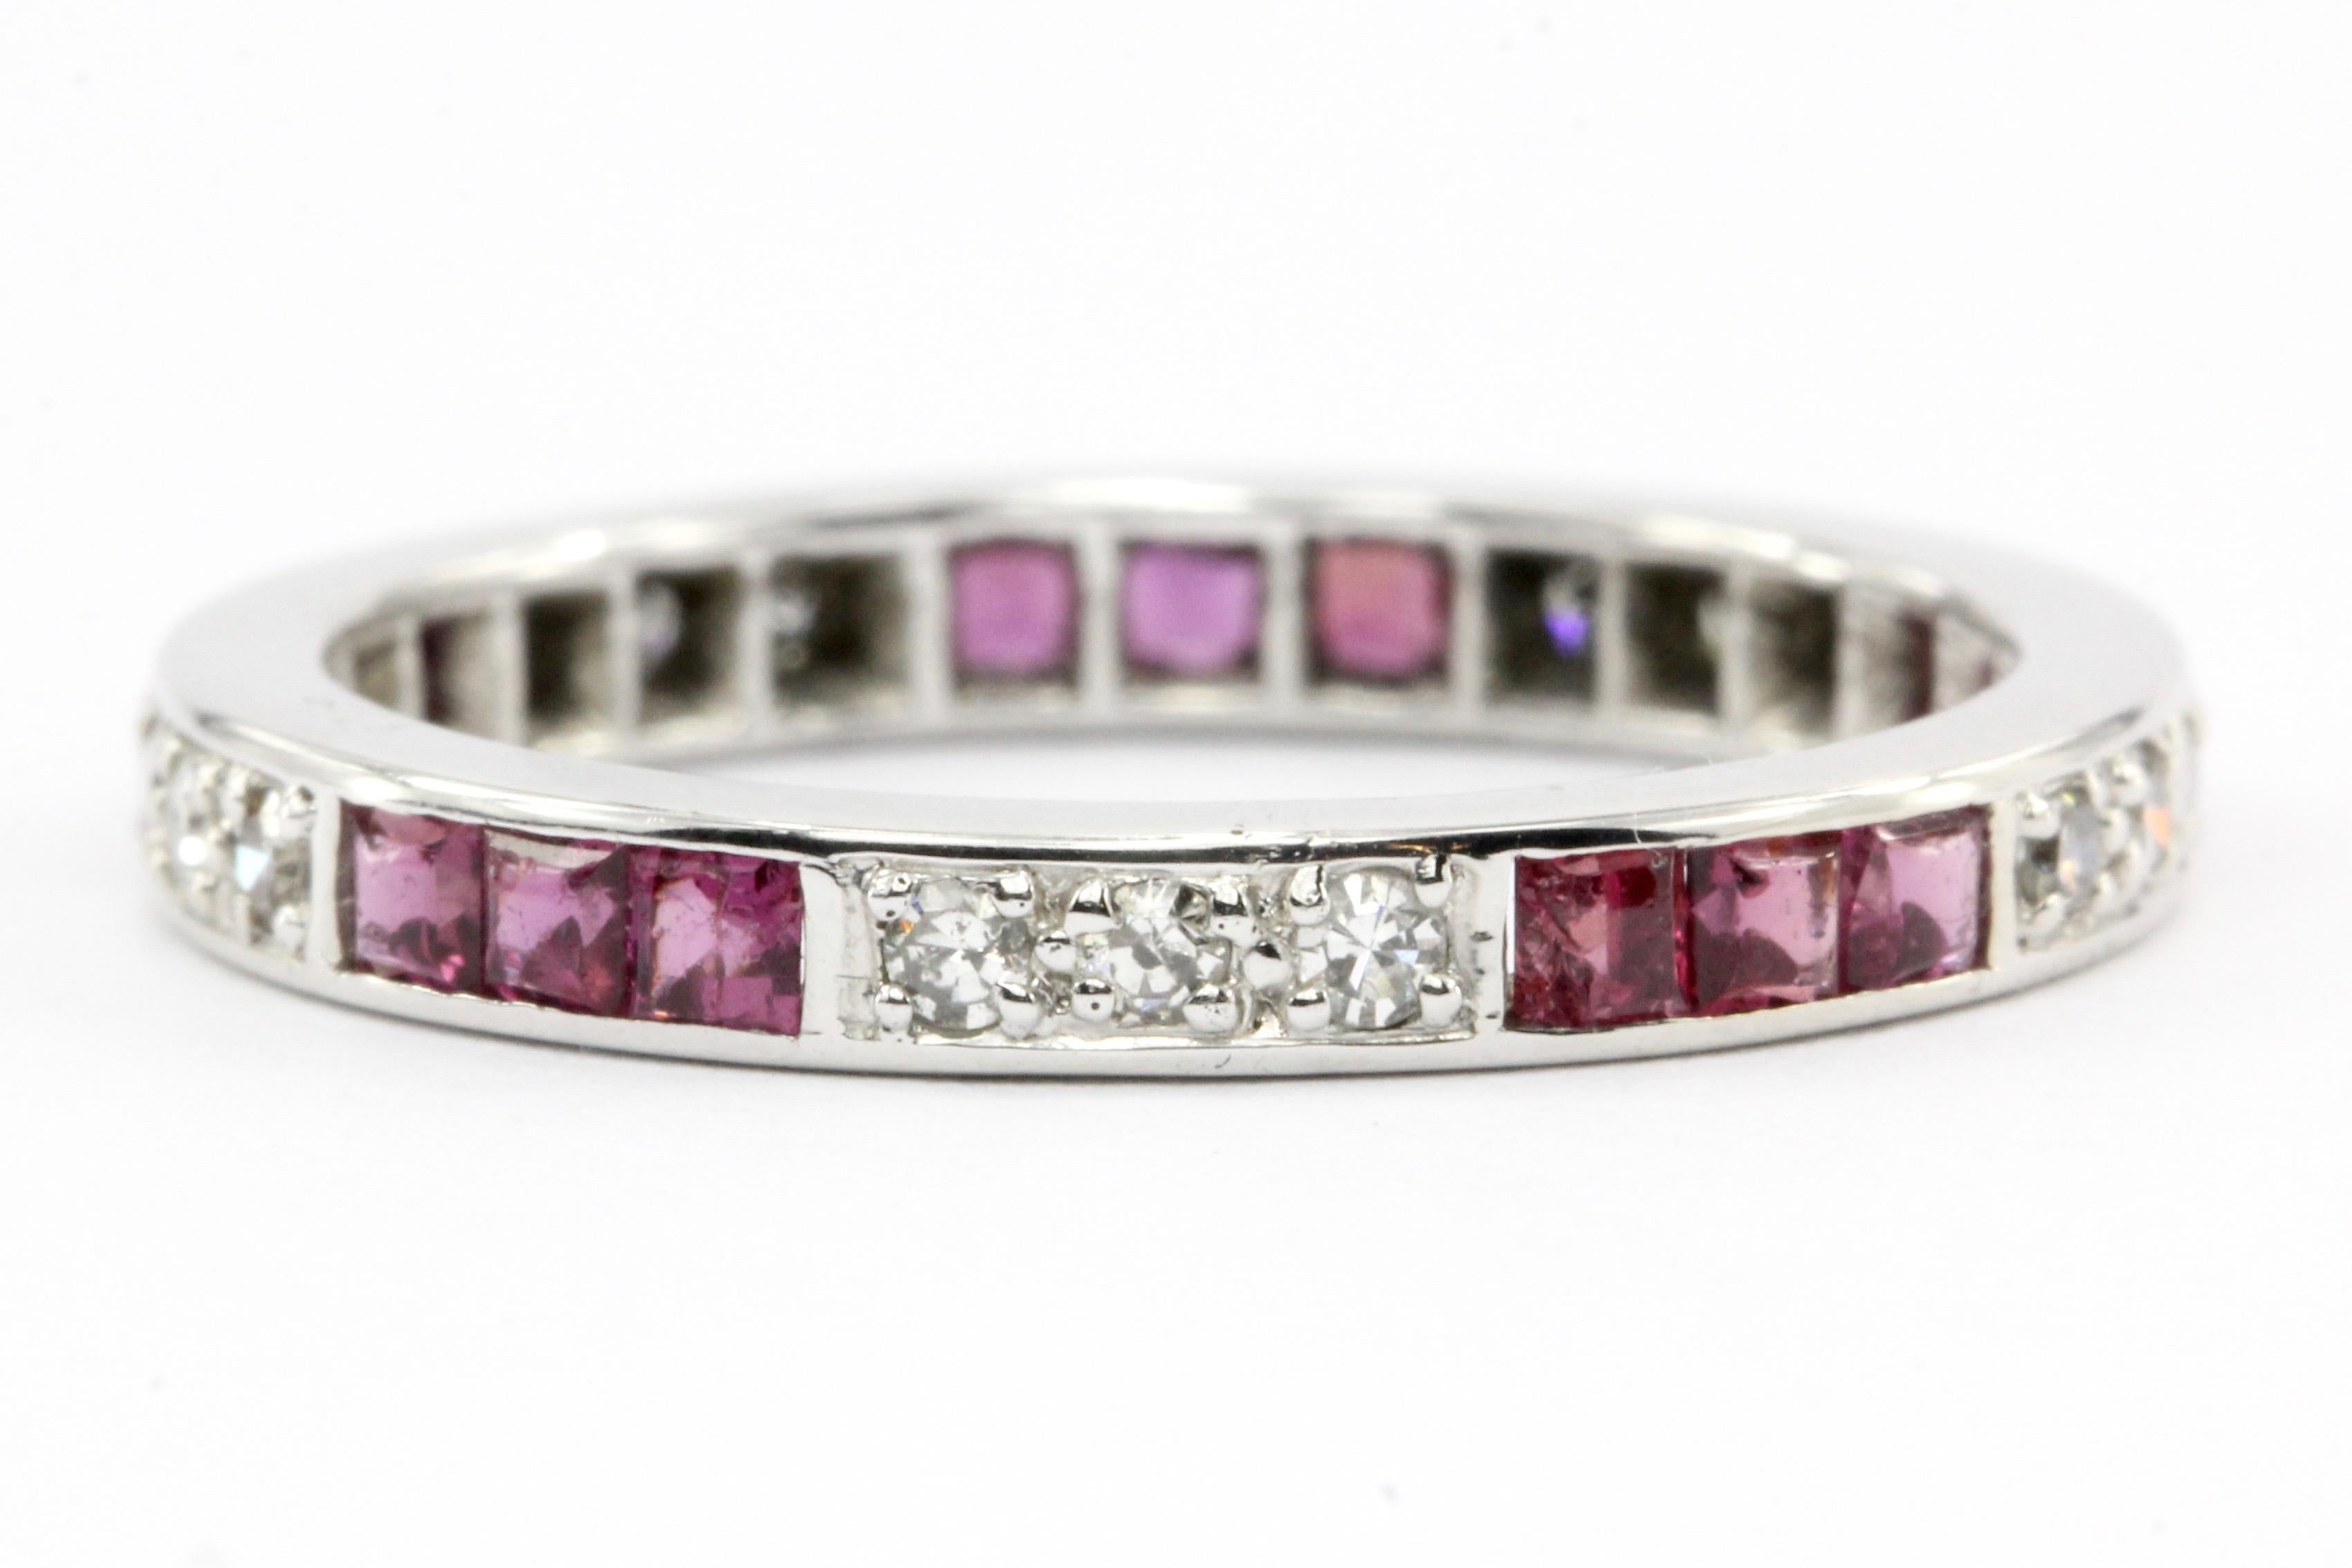 Era: Art Deco c.1920s

Composition: Platinum

Primary Stone: Ruby

Stone Carat: Approximately .75 carats total weight

Accent Stone: Single cut diamonds

Color/Clarity: H/I I1

Total Diamond Weight: Approximately .25 carats total weight 

Ring